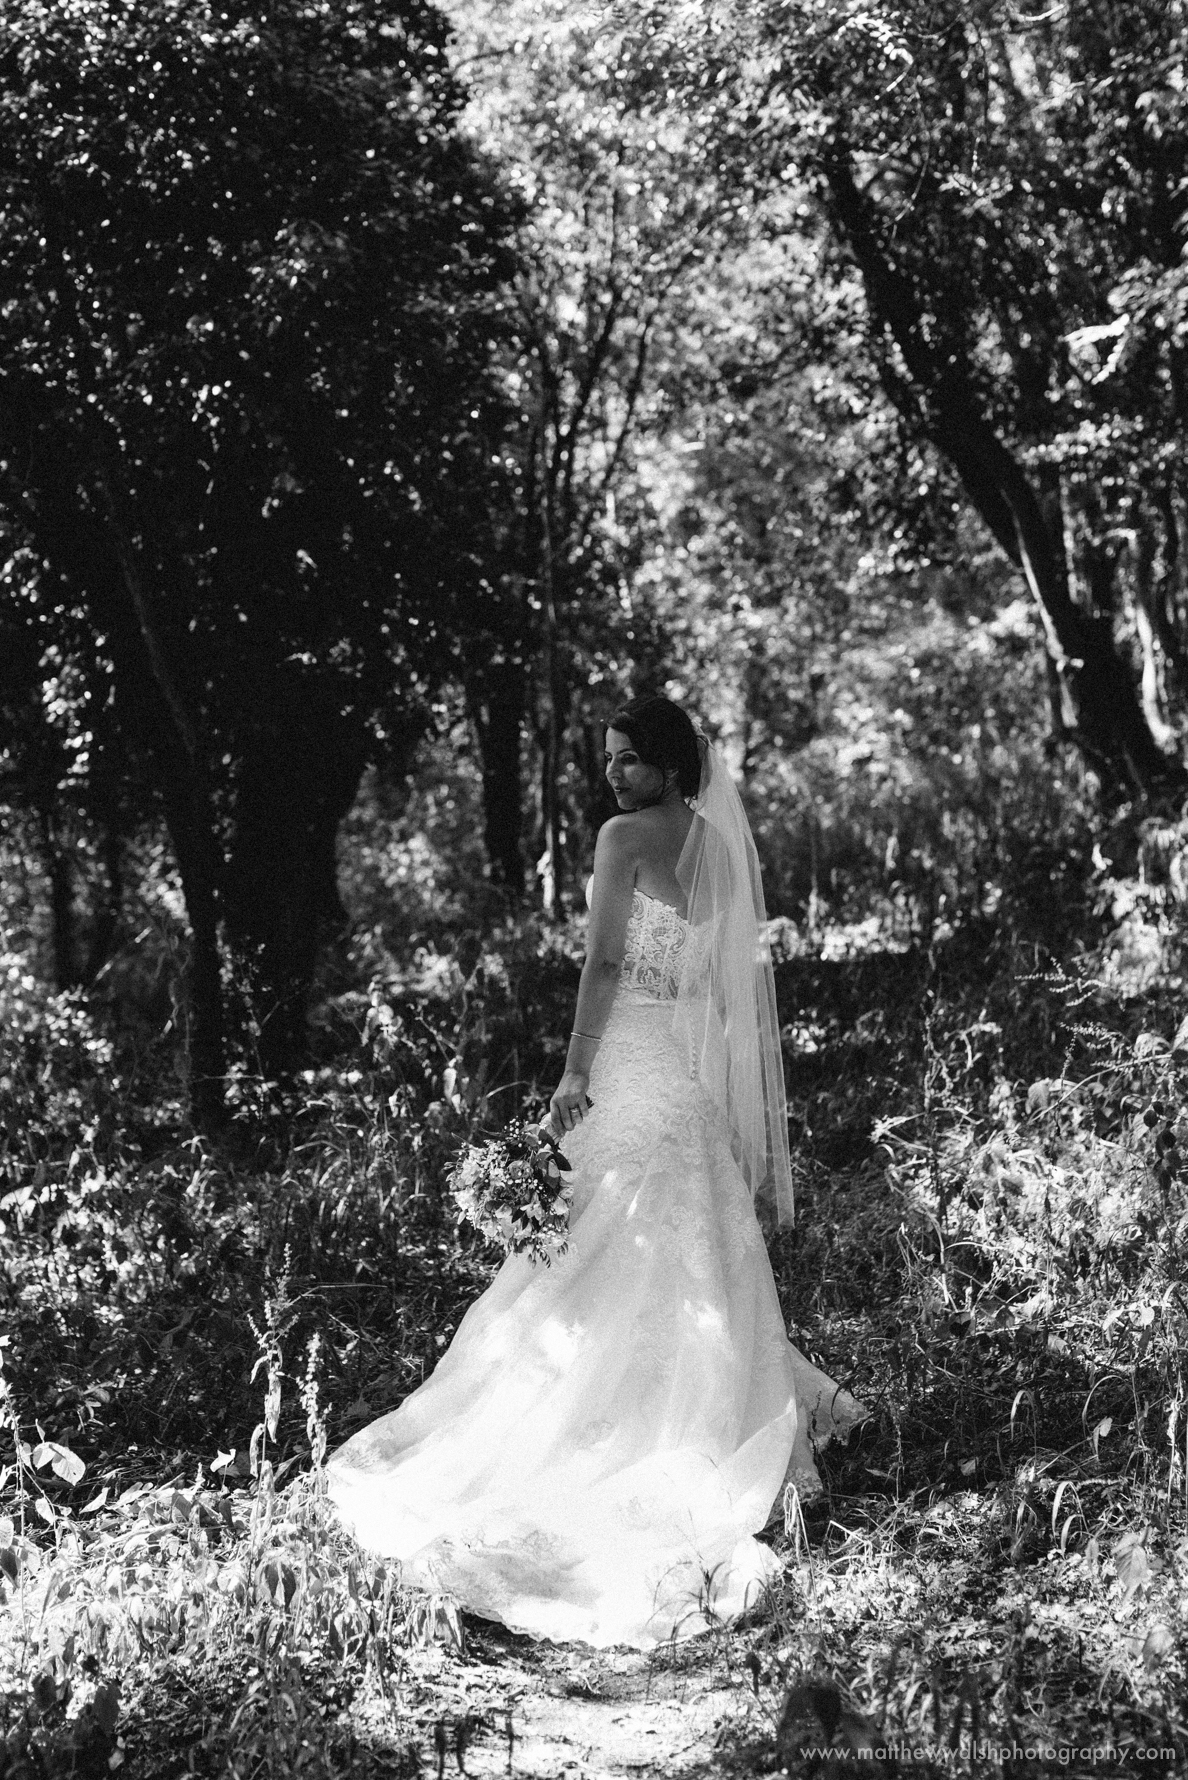 The back of the brides dress as she is framed by a natural backdrop all in wonderful black and white photography